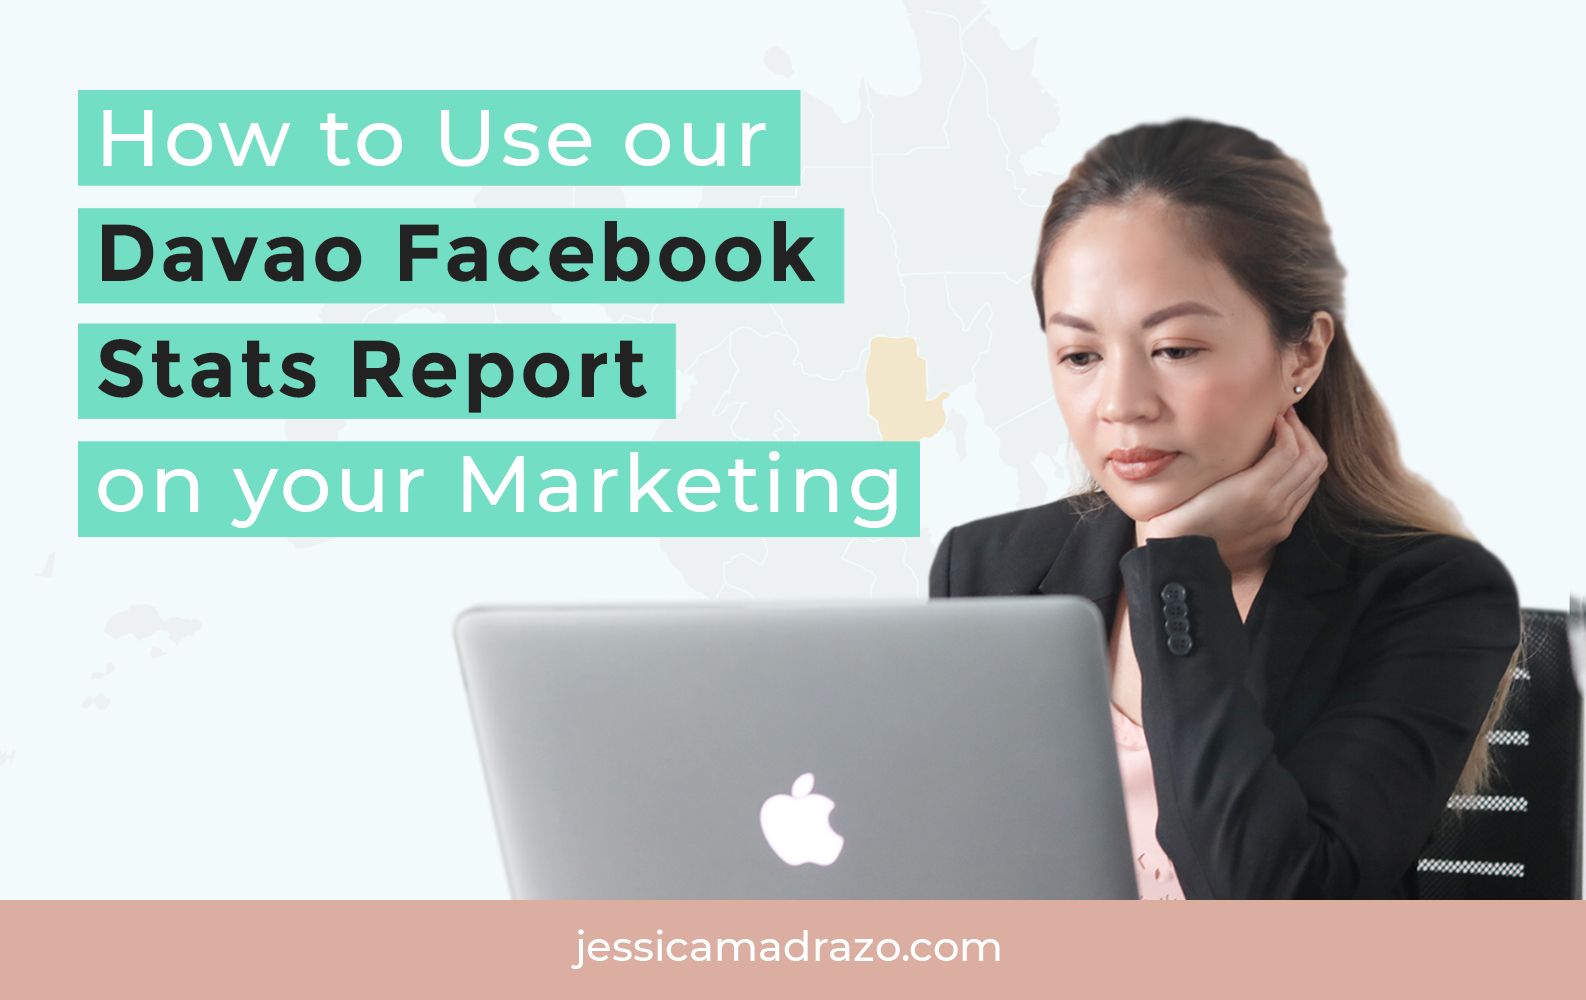 How to Use our Davao Facebook Stats Report on your Marketing